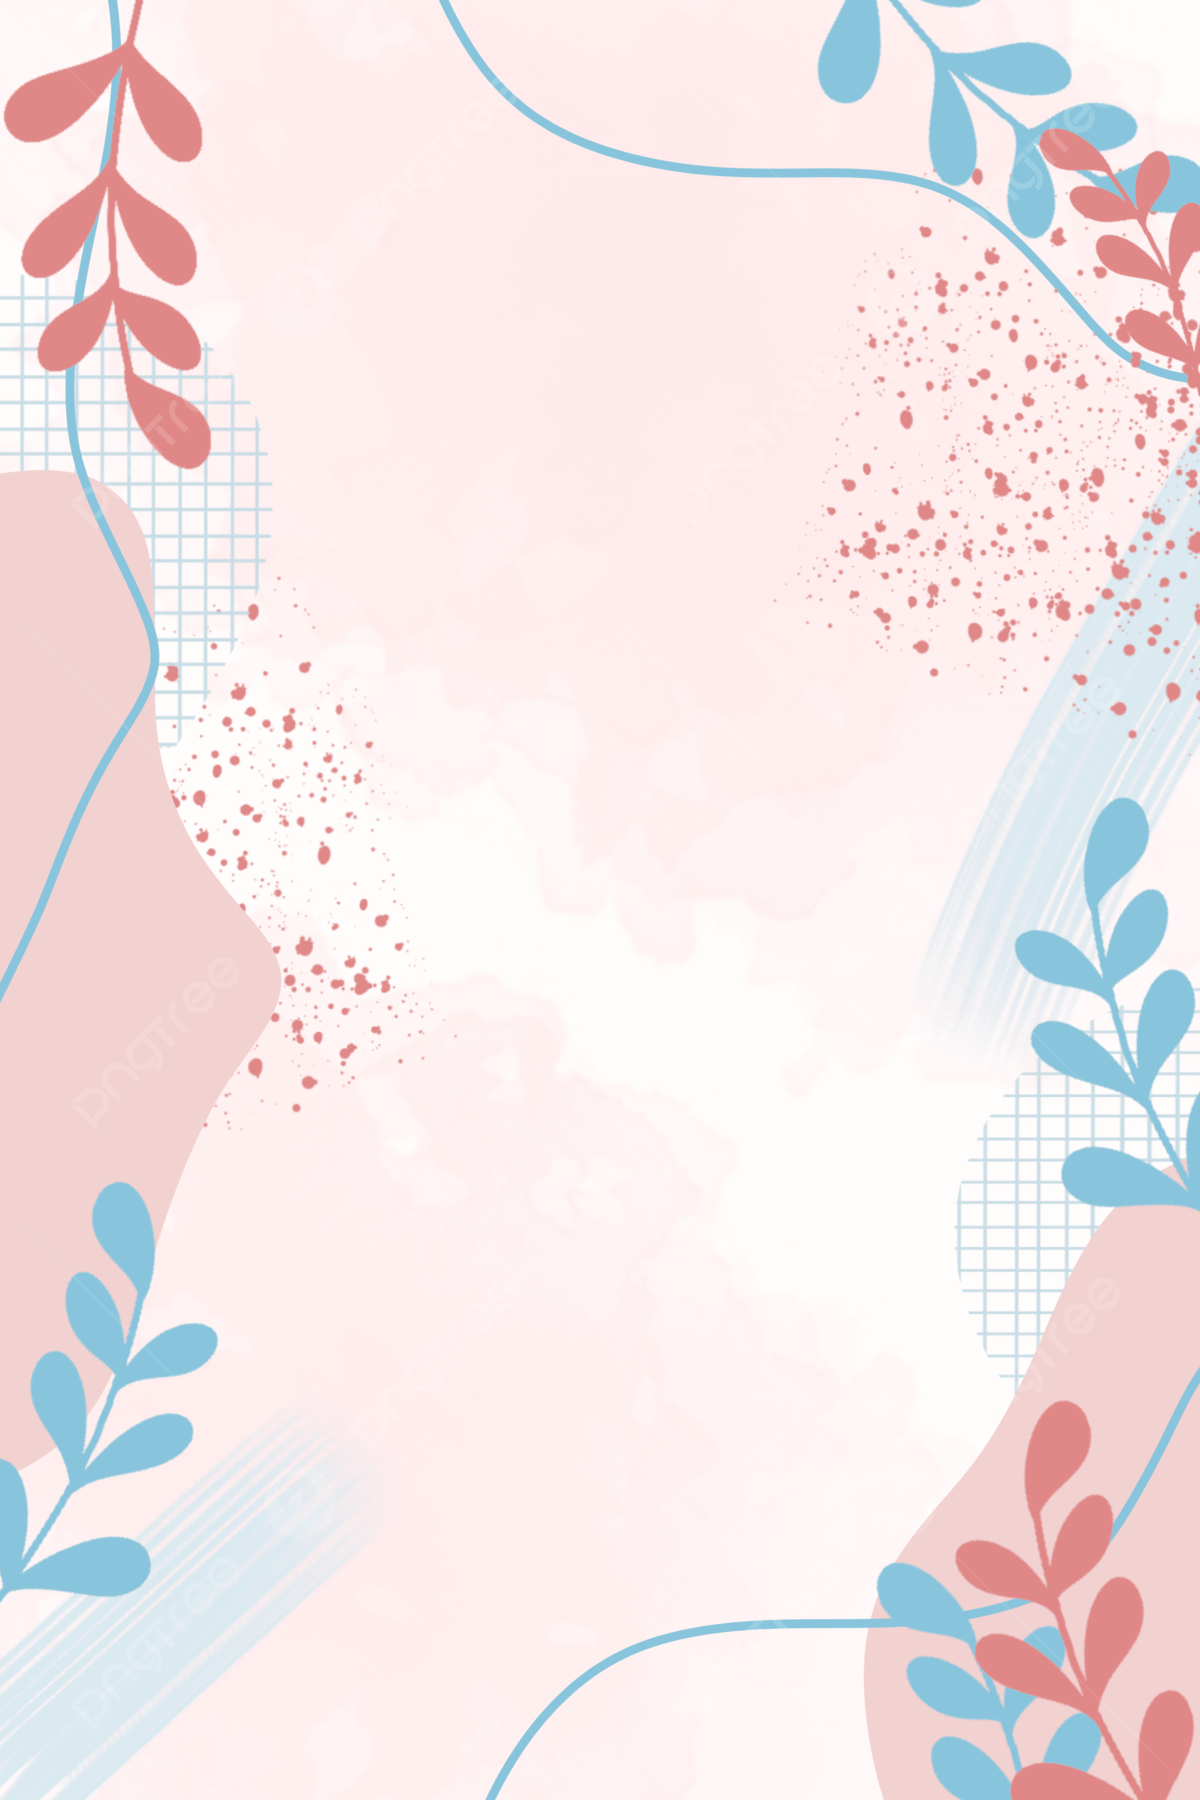 Pastel Aesthetic Wallpaper And Blue Pink Leaves Background, Wallpaper, Aesthetic, Abstract Background Image for Free Download